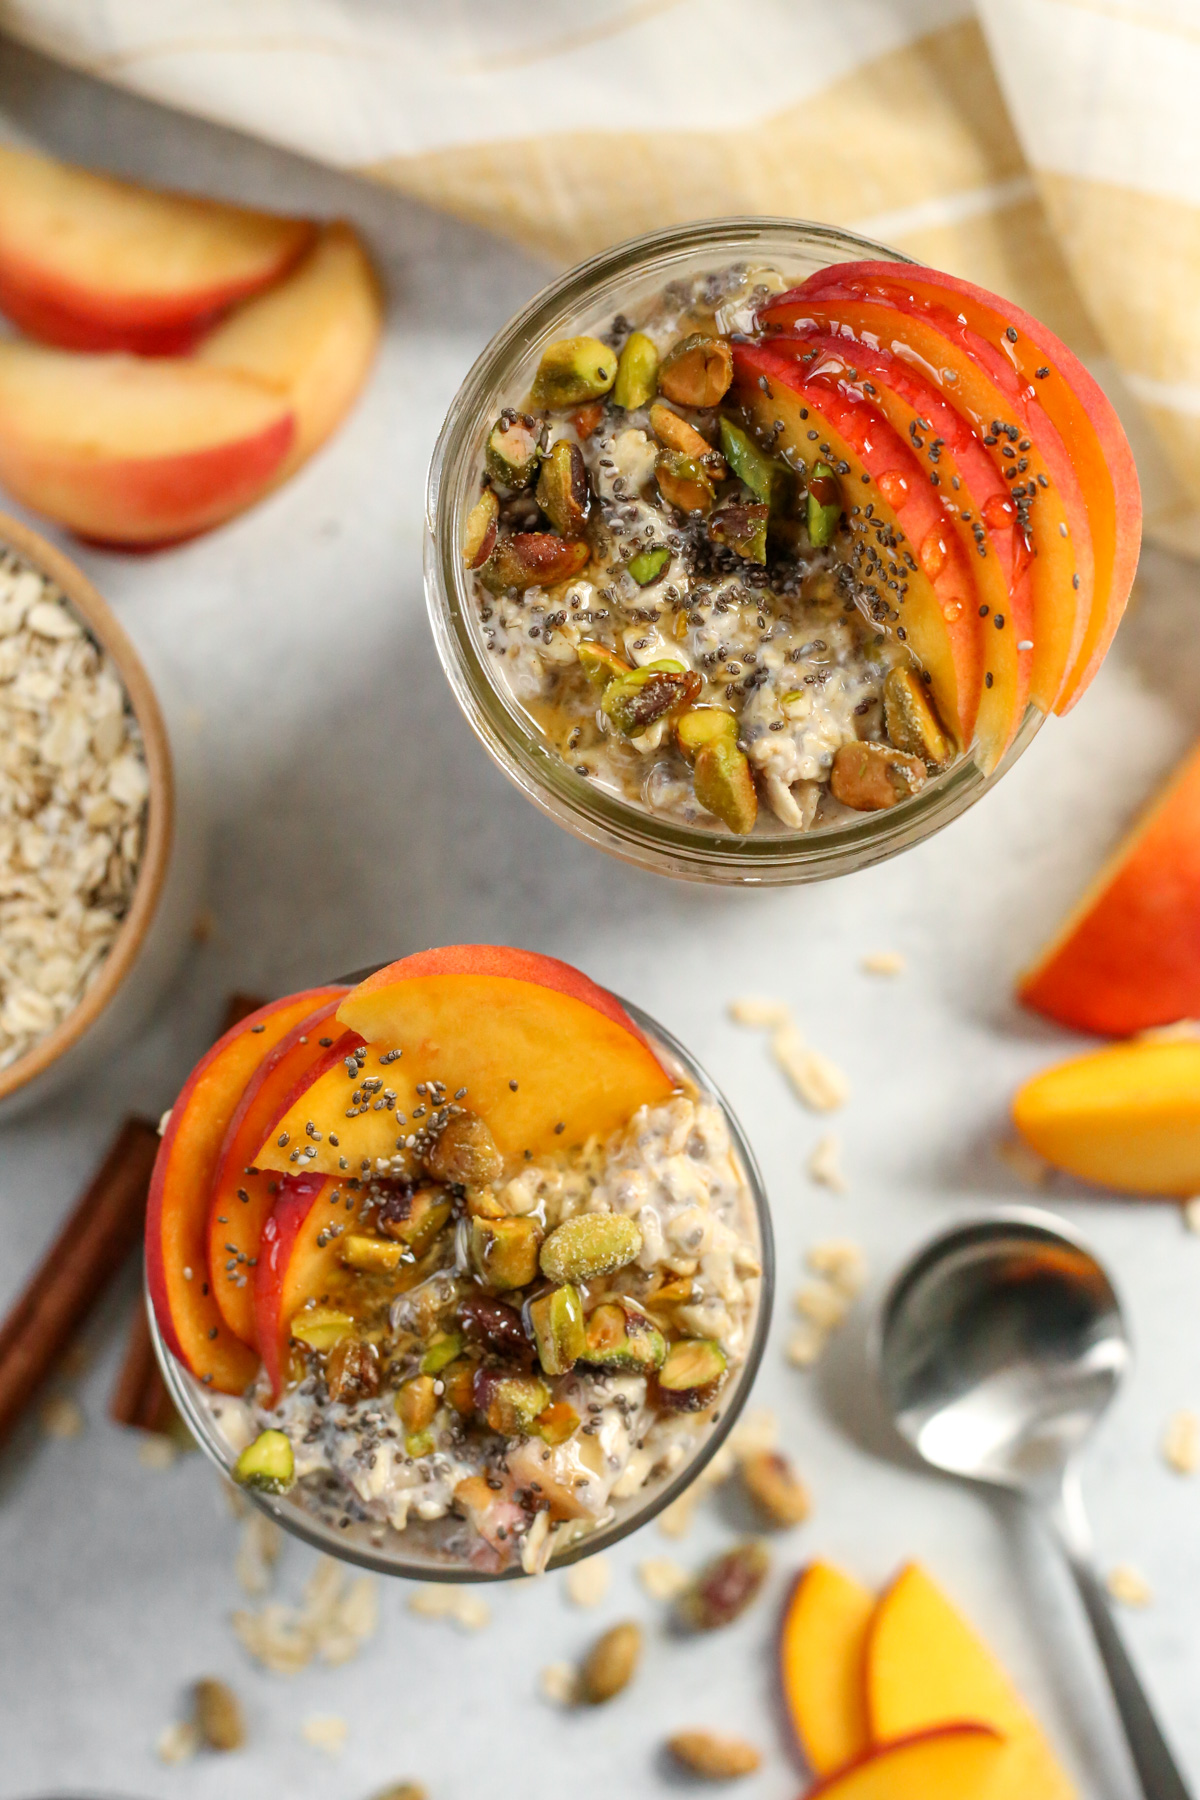 Overhead view of two jars of Peaches and Cream Overnight Oats, beautifully garnished with sliced peaches, pistachios, chia seeds, and a drizzle of honey, with extra oats and peach slices scattered nearby